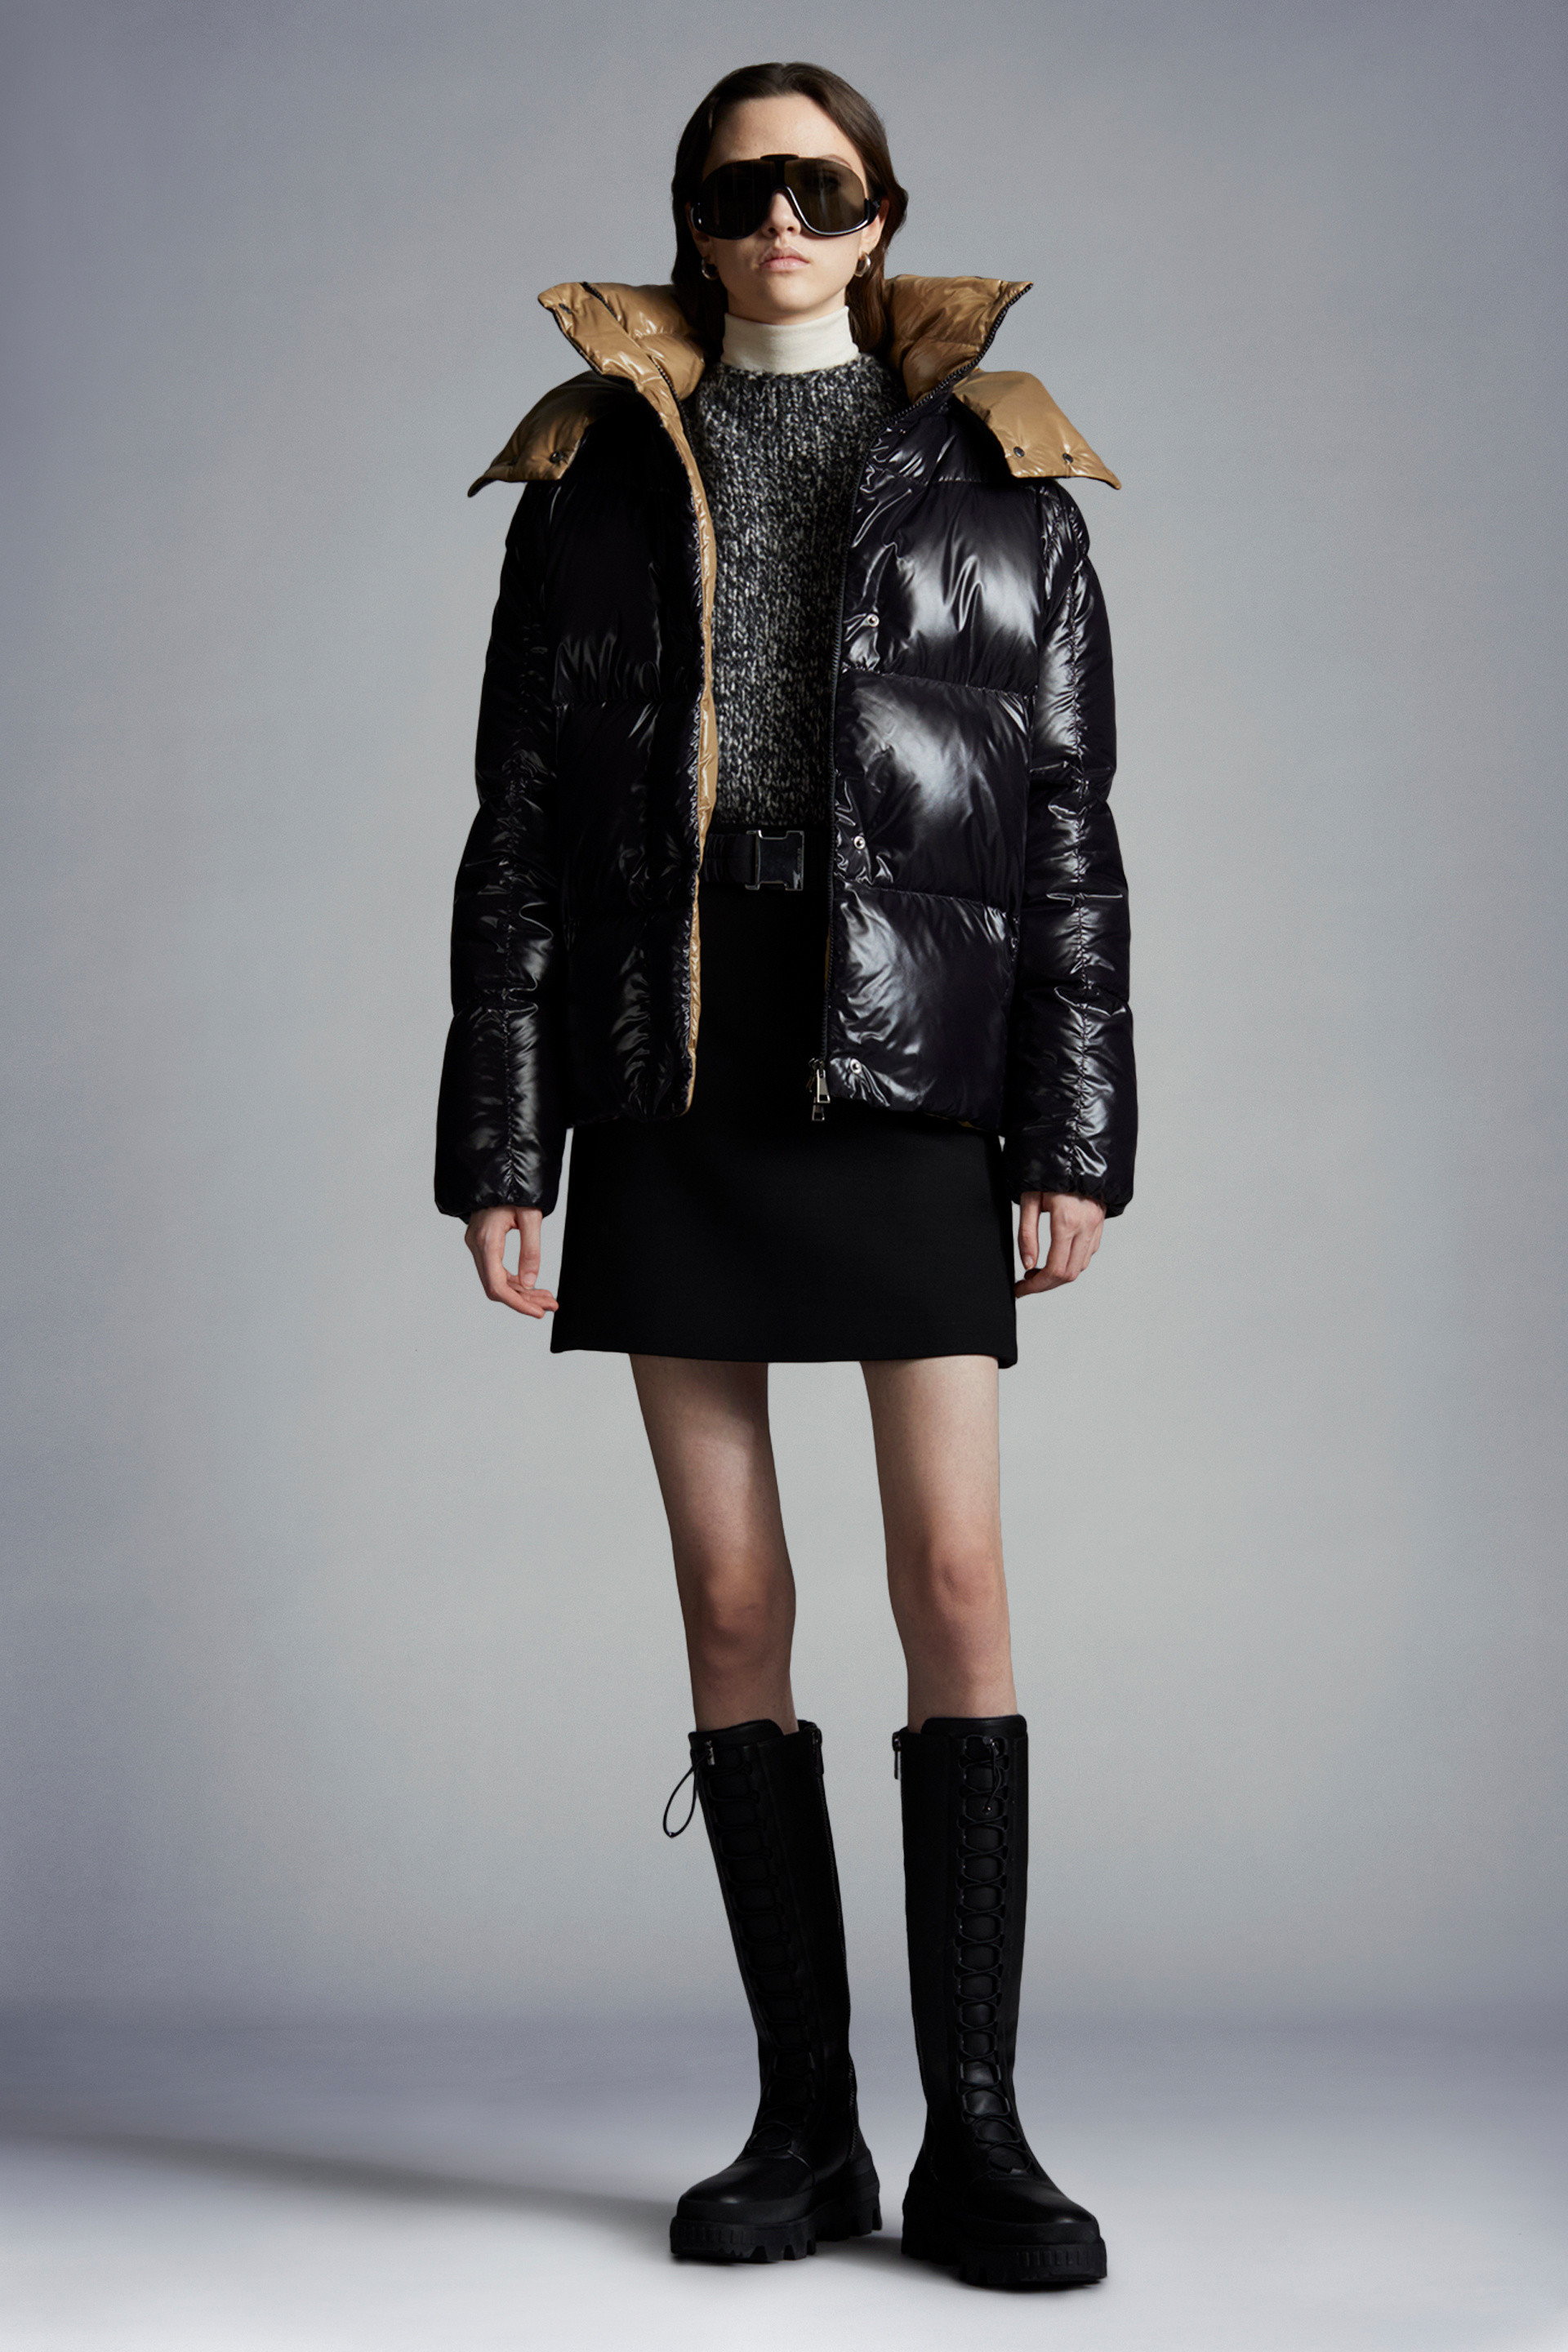 Moncler Women - Highlights, New in and Icons | Moncler US